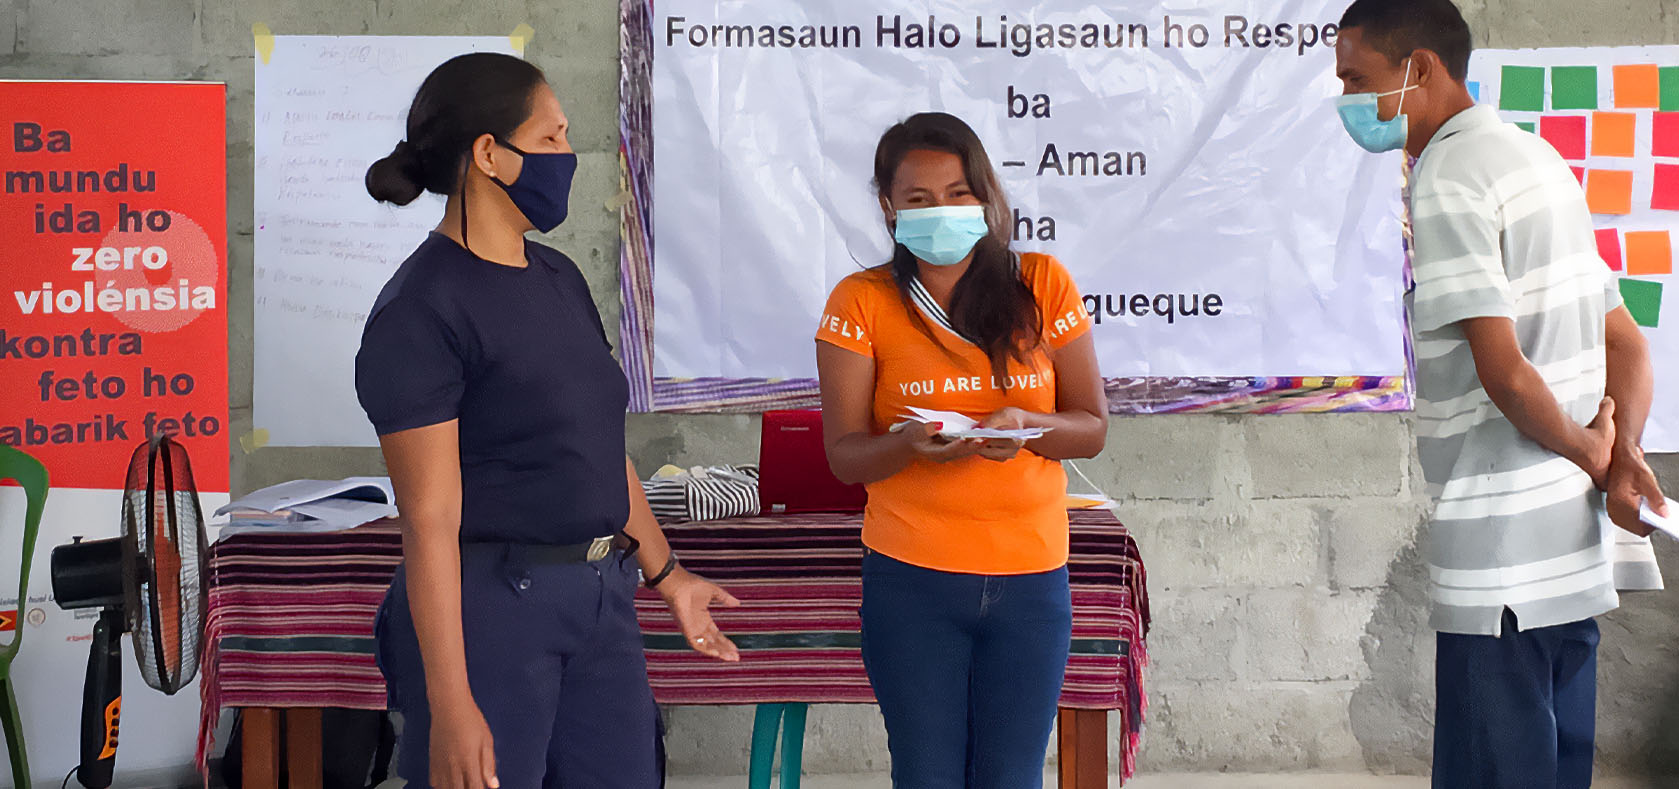 (From left) A police officer, a mother and a father do a role play on non-violent relationships with children at home for a Positive Parenting Session in Viqueque municipality of Timor-Leste on 26 August 2021. Photo: UN Women/Sylvio da Fonseca